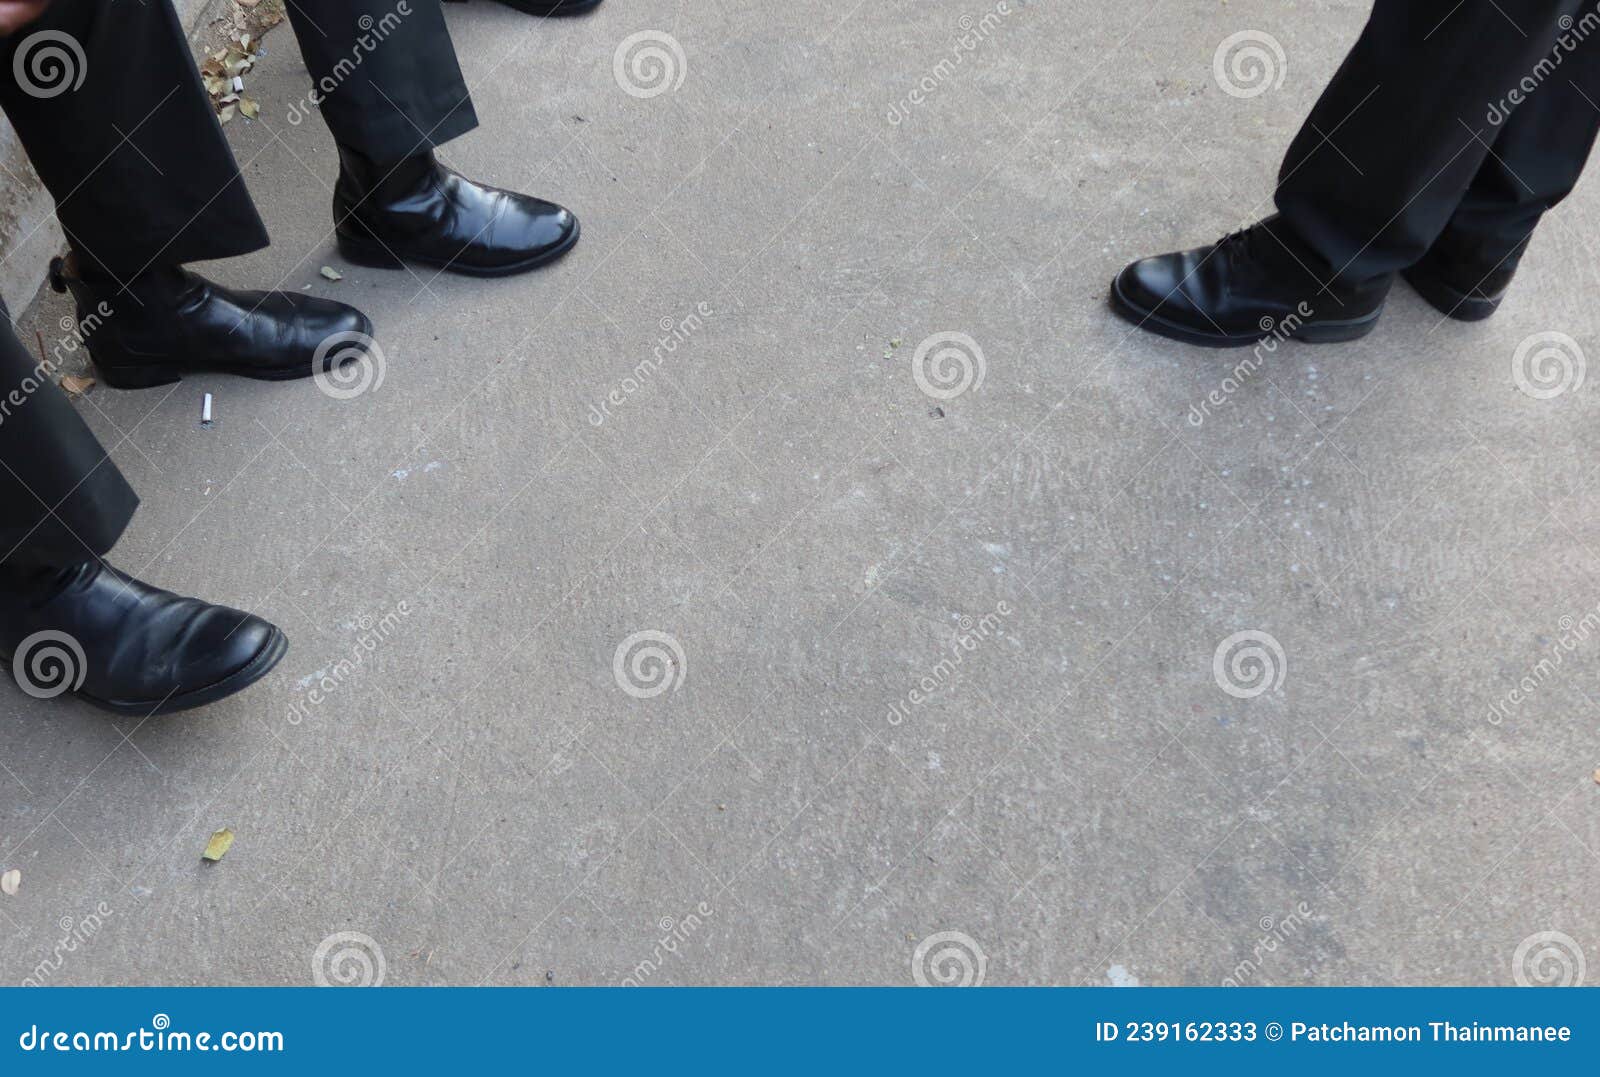 look above the legs of a man wearing black slacks wearing leather shoes.